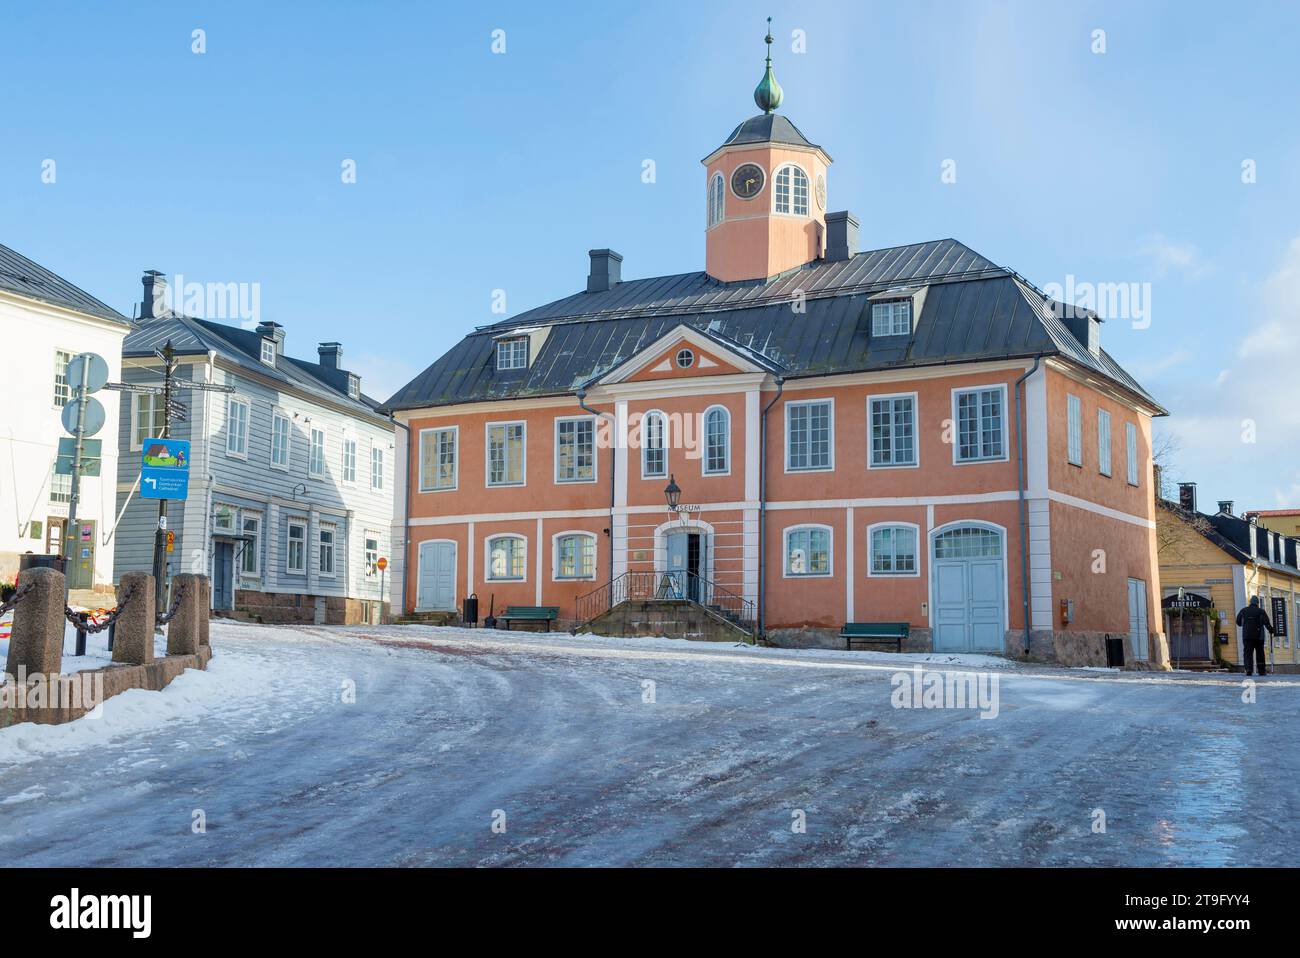 PORVOO, FINLAND - MARCH 10, 2019: View of the old town hall building on a sunny March day Stock Photo